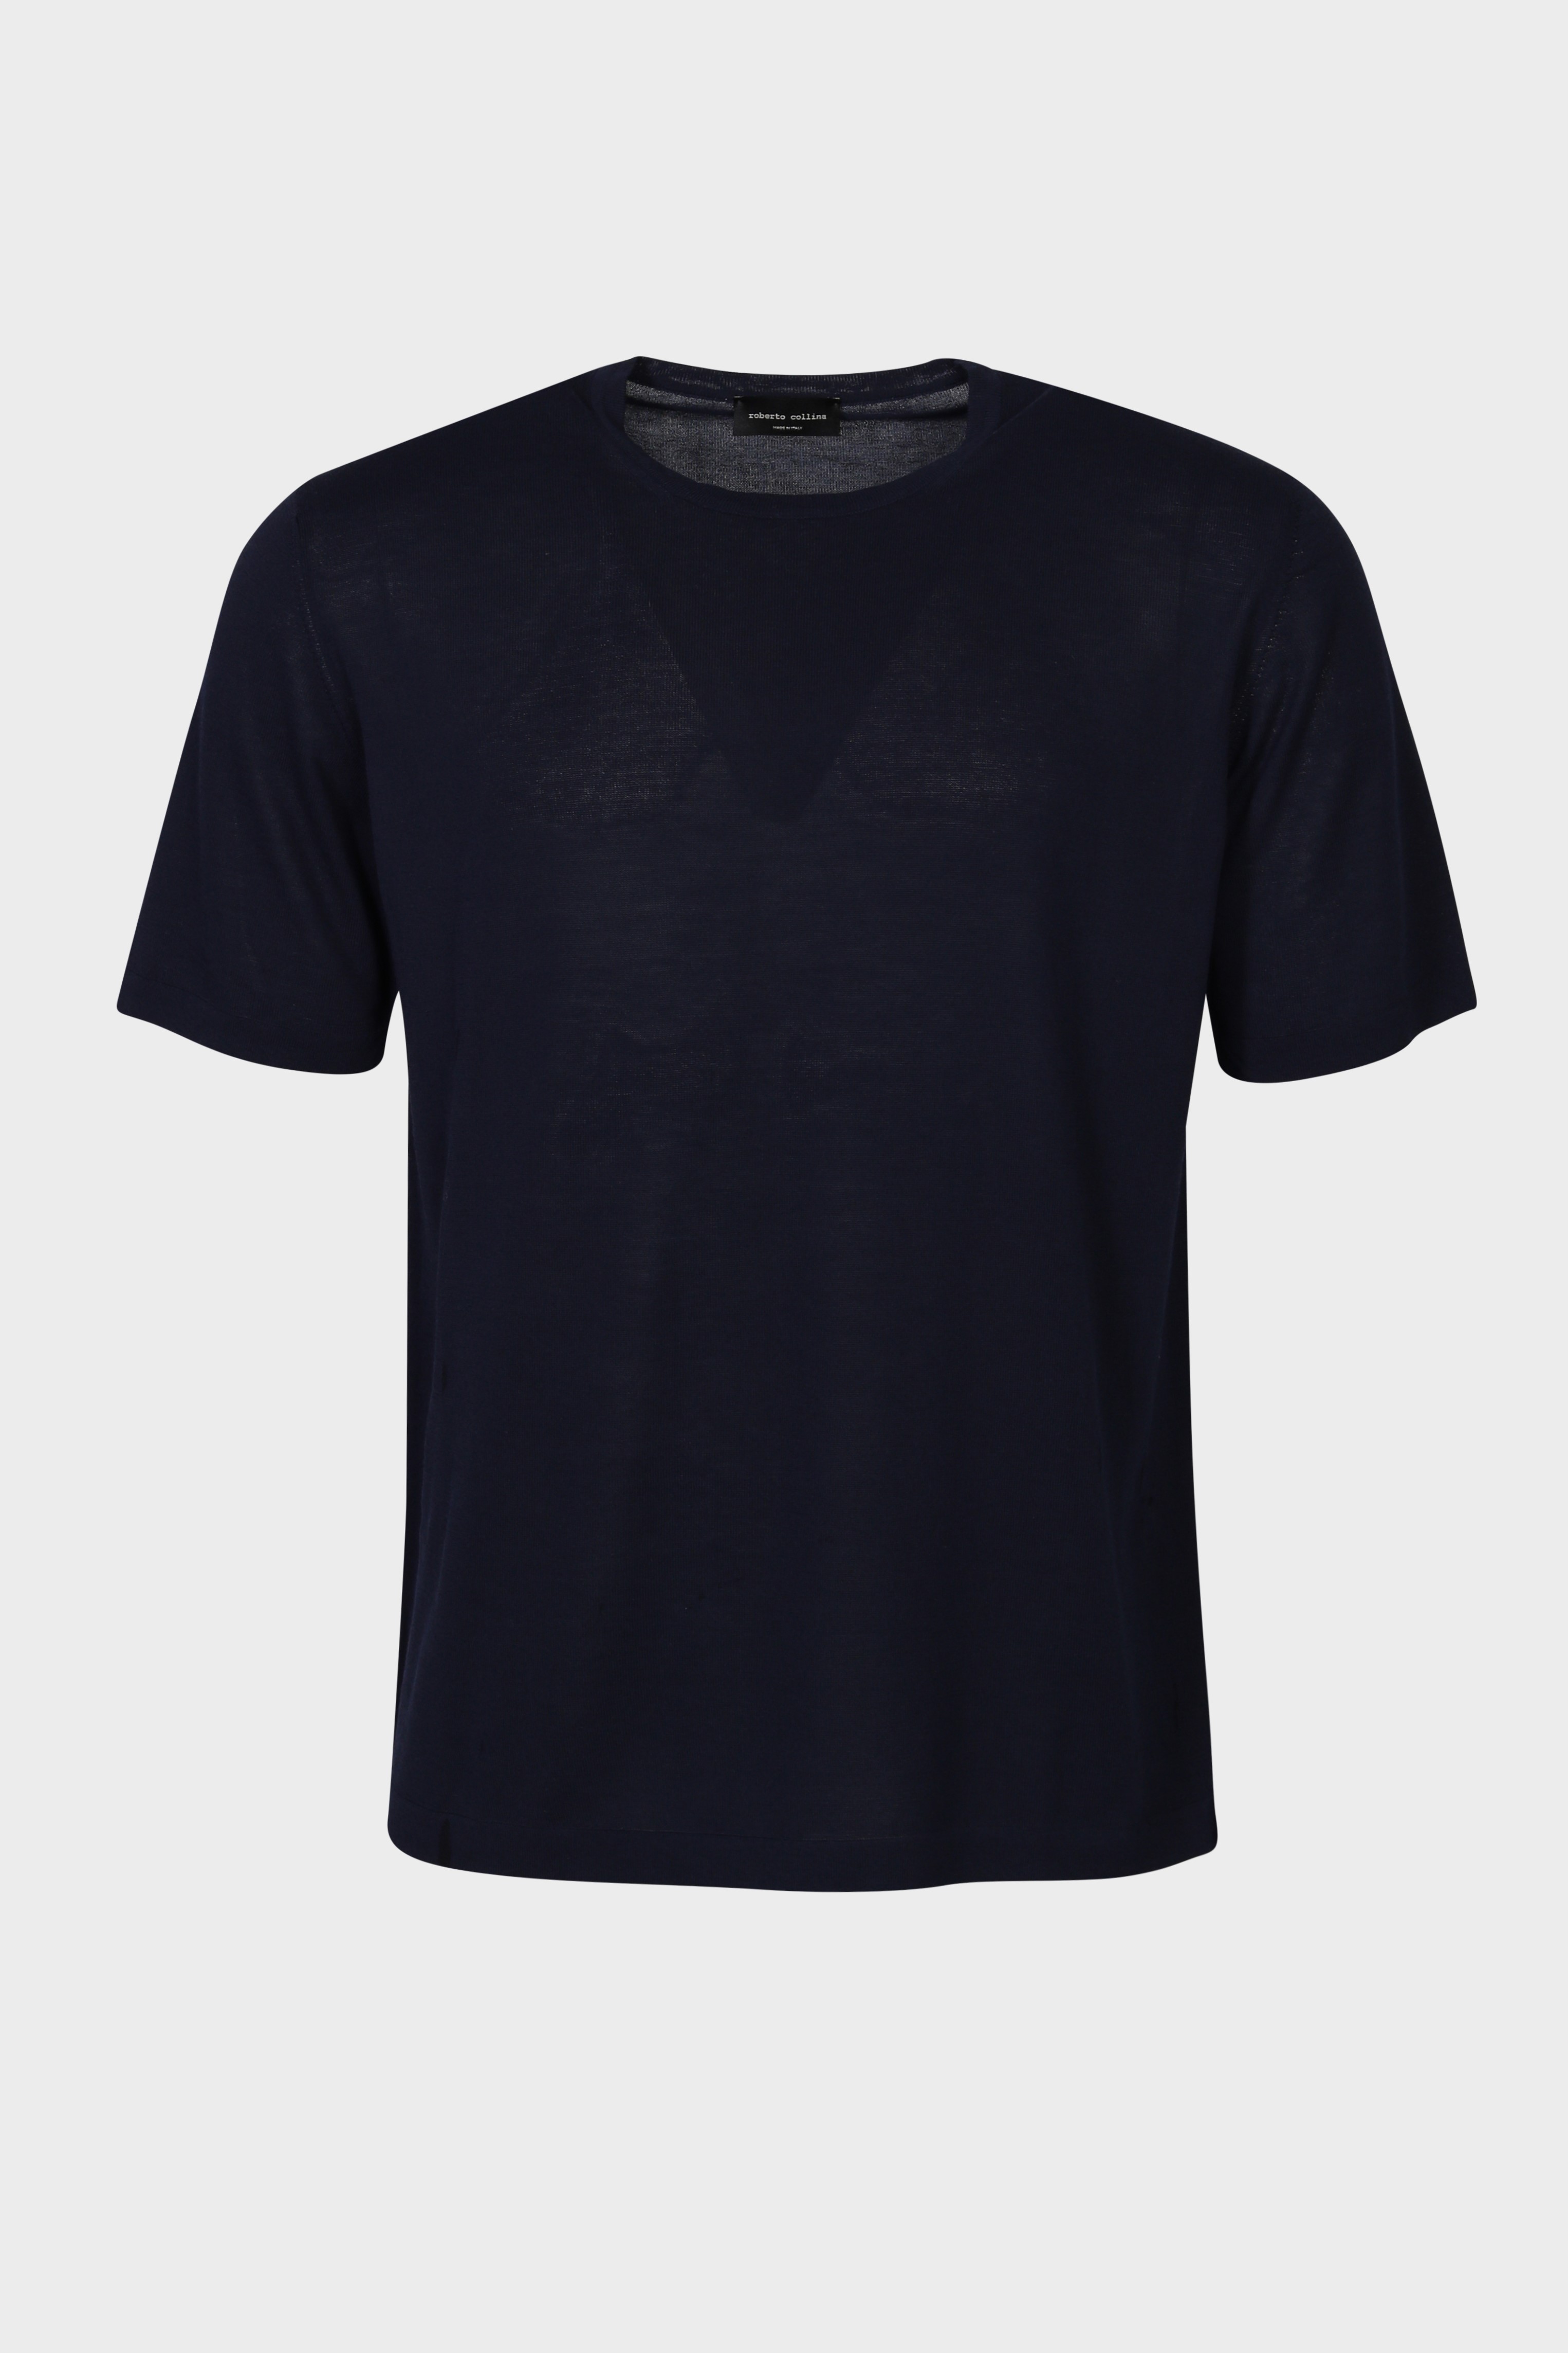 ROBERTO COLLINA Cotton Knit T-Shirt in Navy